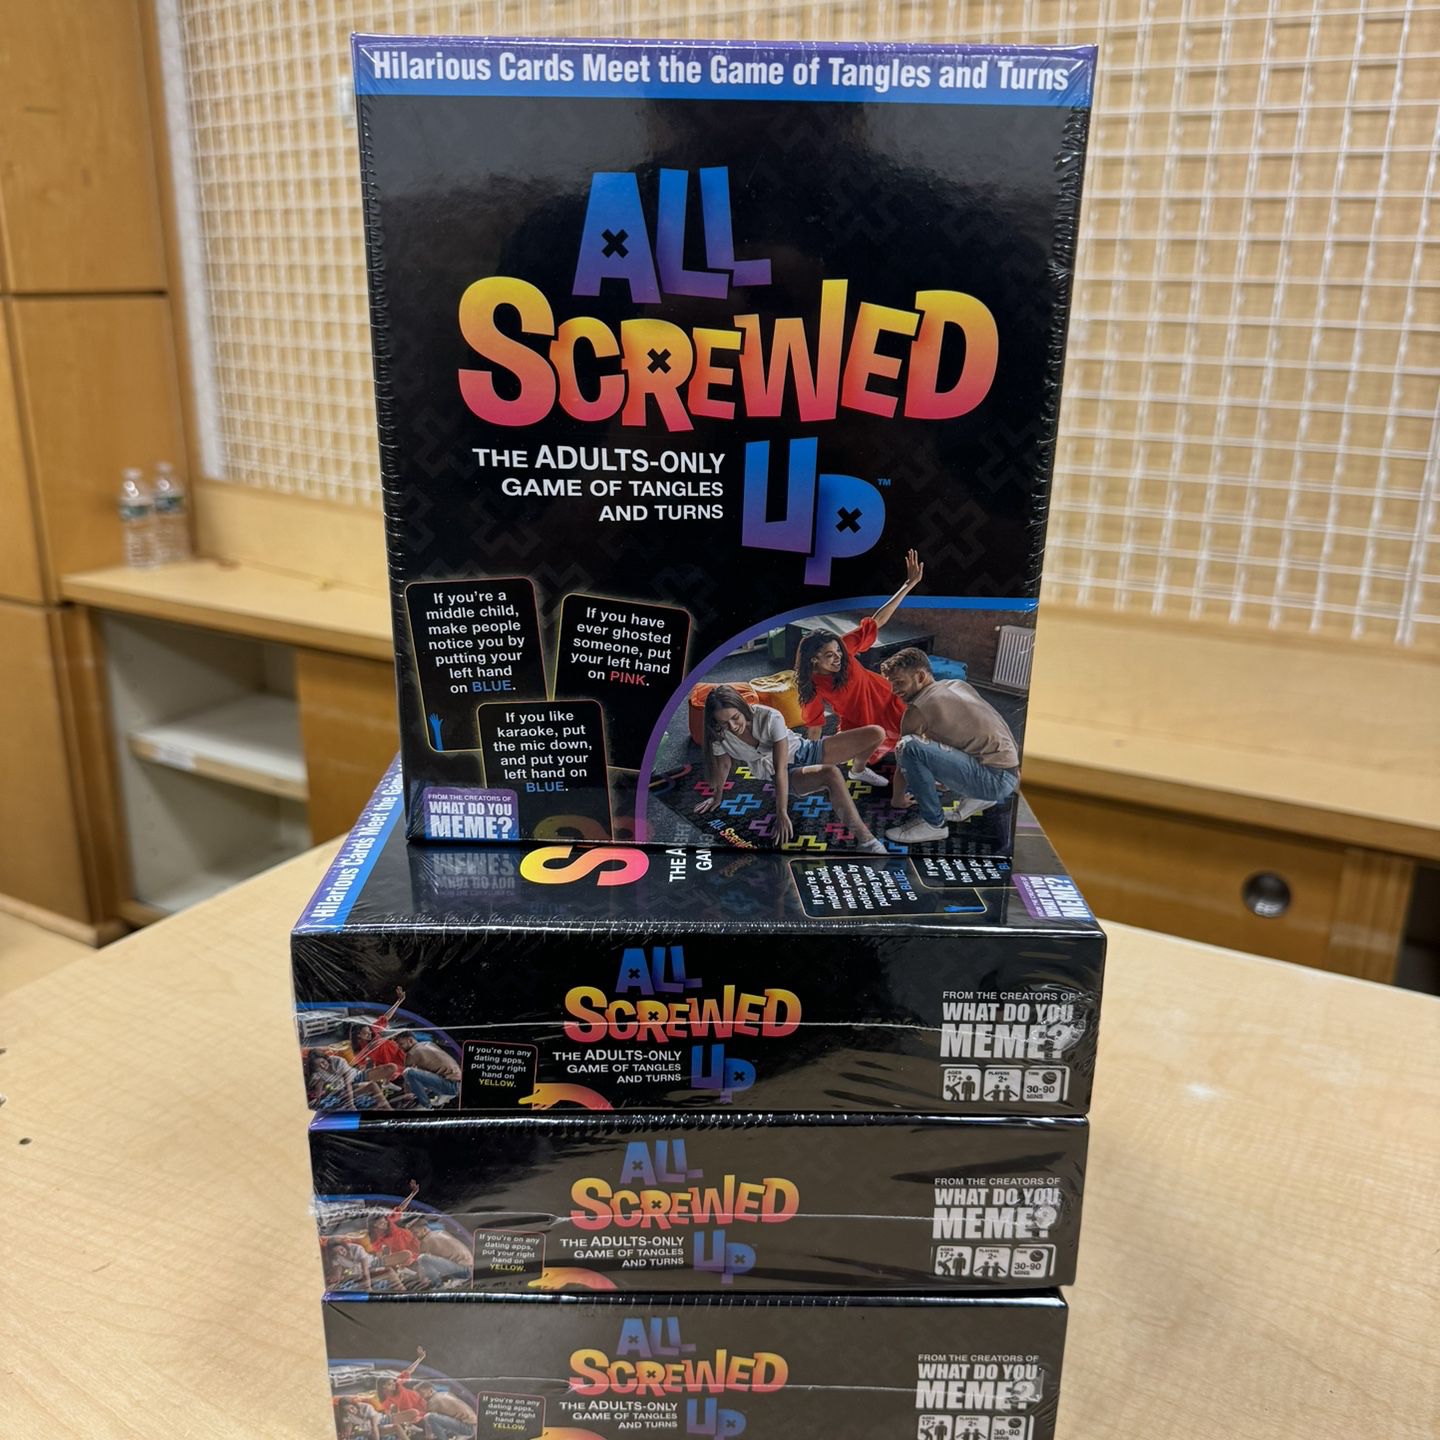 What Do You Meme LLC All Screwed up Adults-Only Party Game